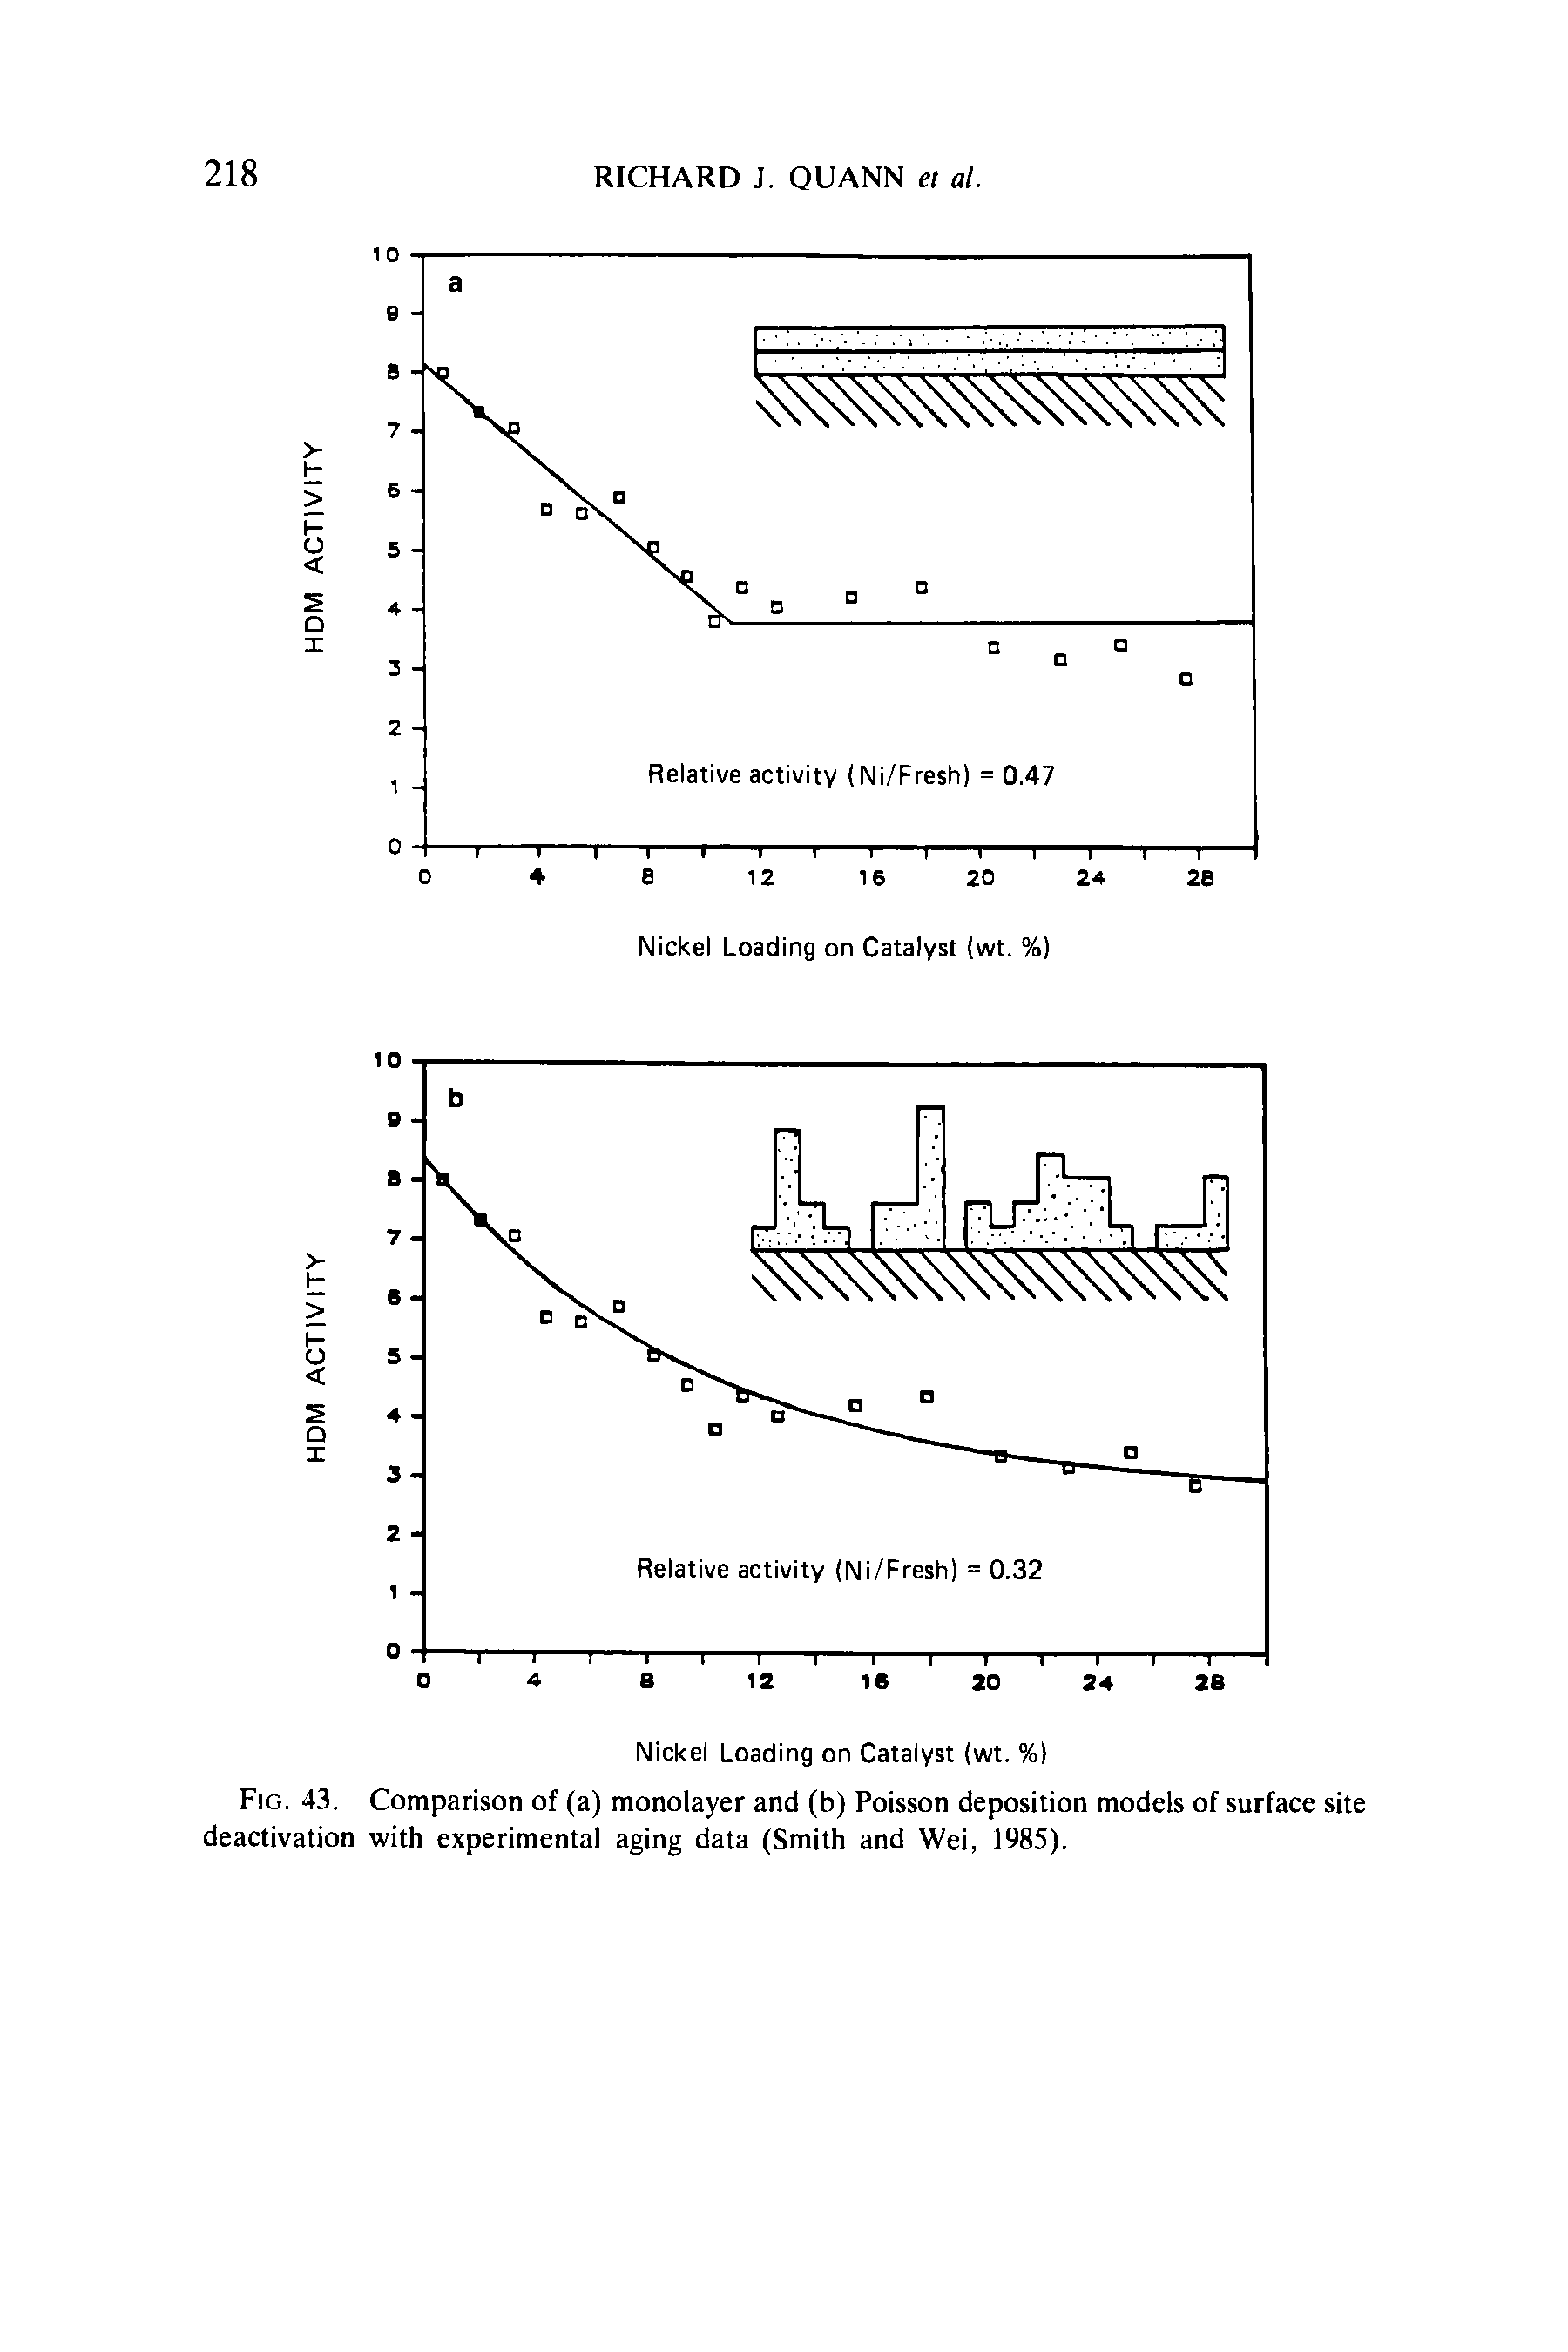 Fig. 43. Comparison of (a) monolayer and (b) Poisson deposition models of surface site deactivation with experimental aging data (Smith and Wei, 1985).